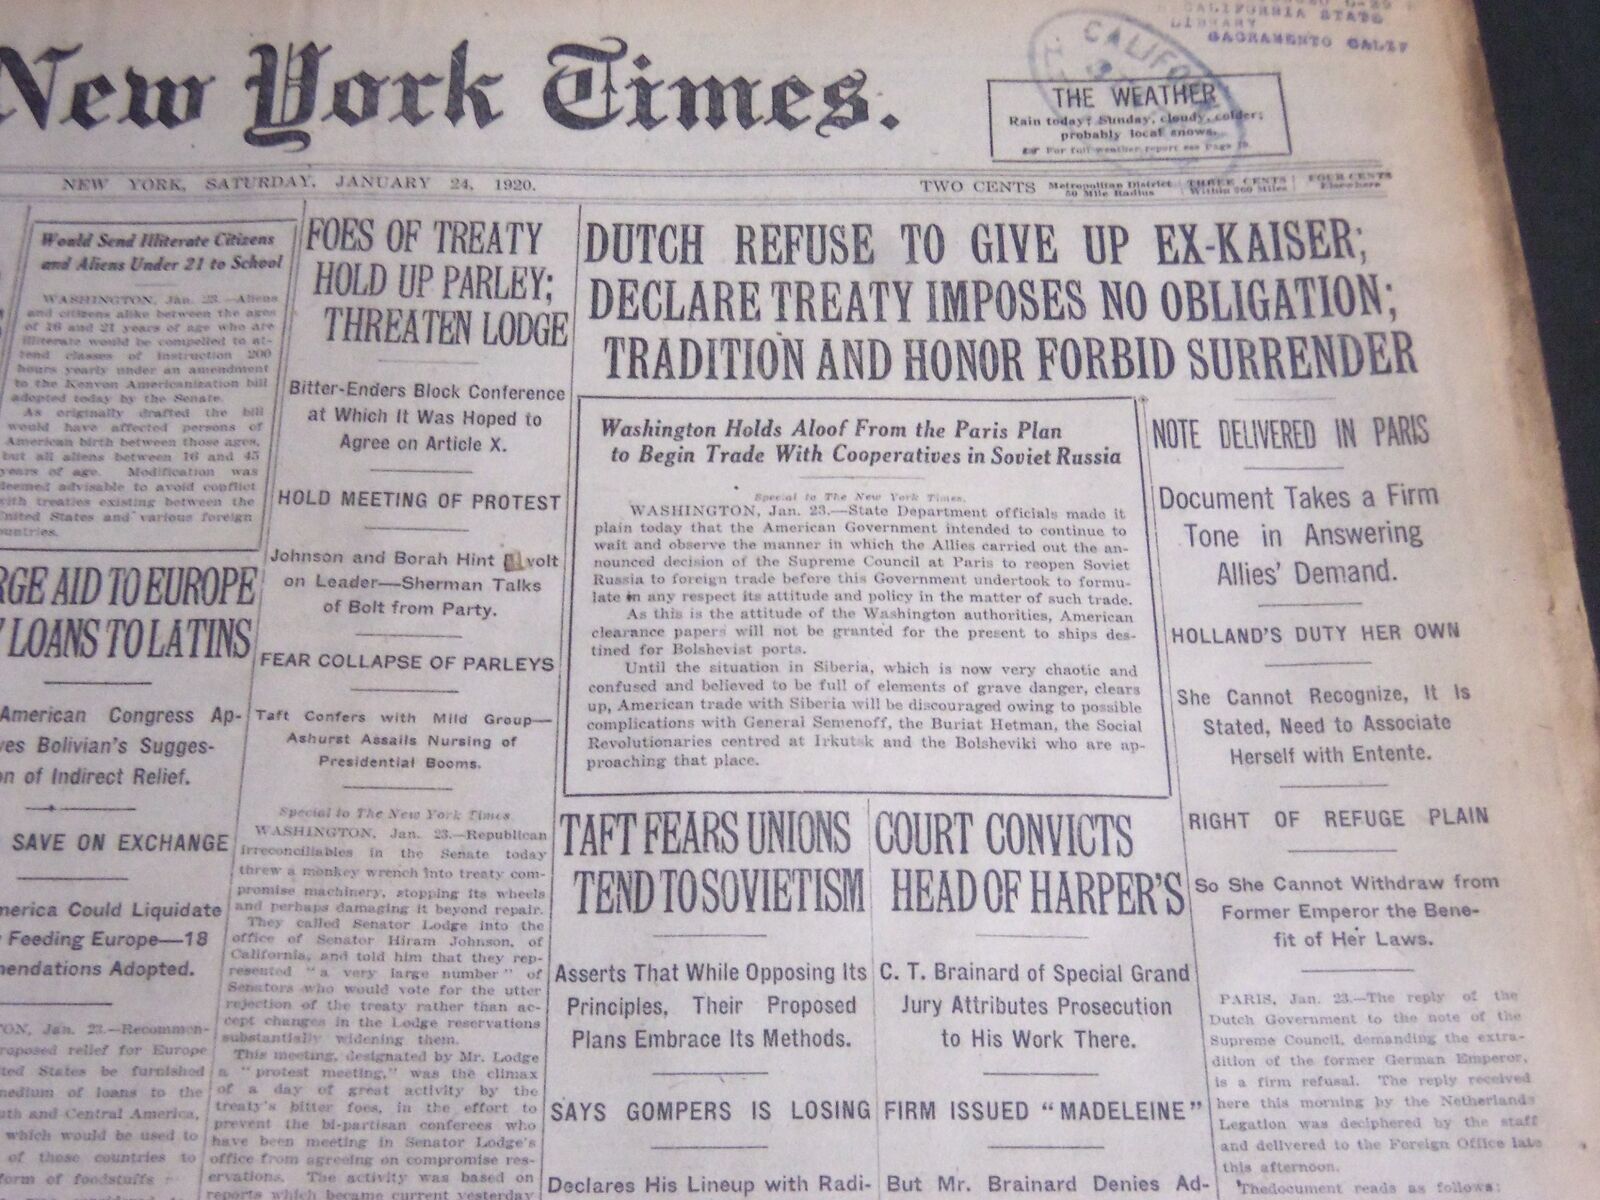 1920 JANUARY 24 NEW YORK TIMES - DUTCH REFUSE TO GIVE UP EX-KAISER - NT 6747